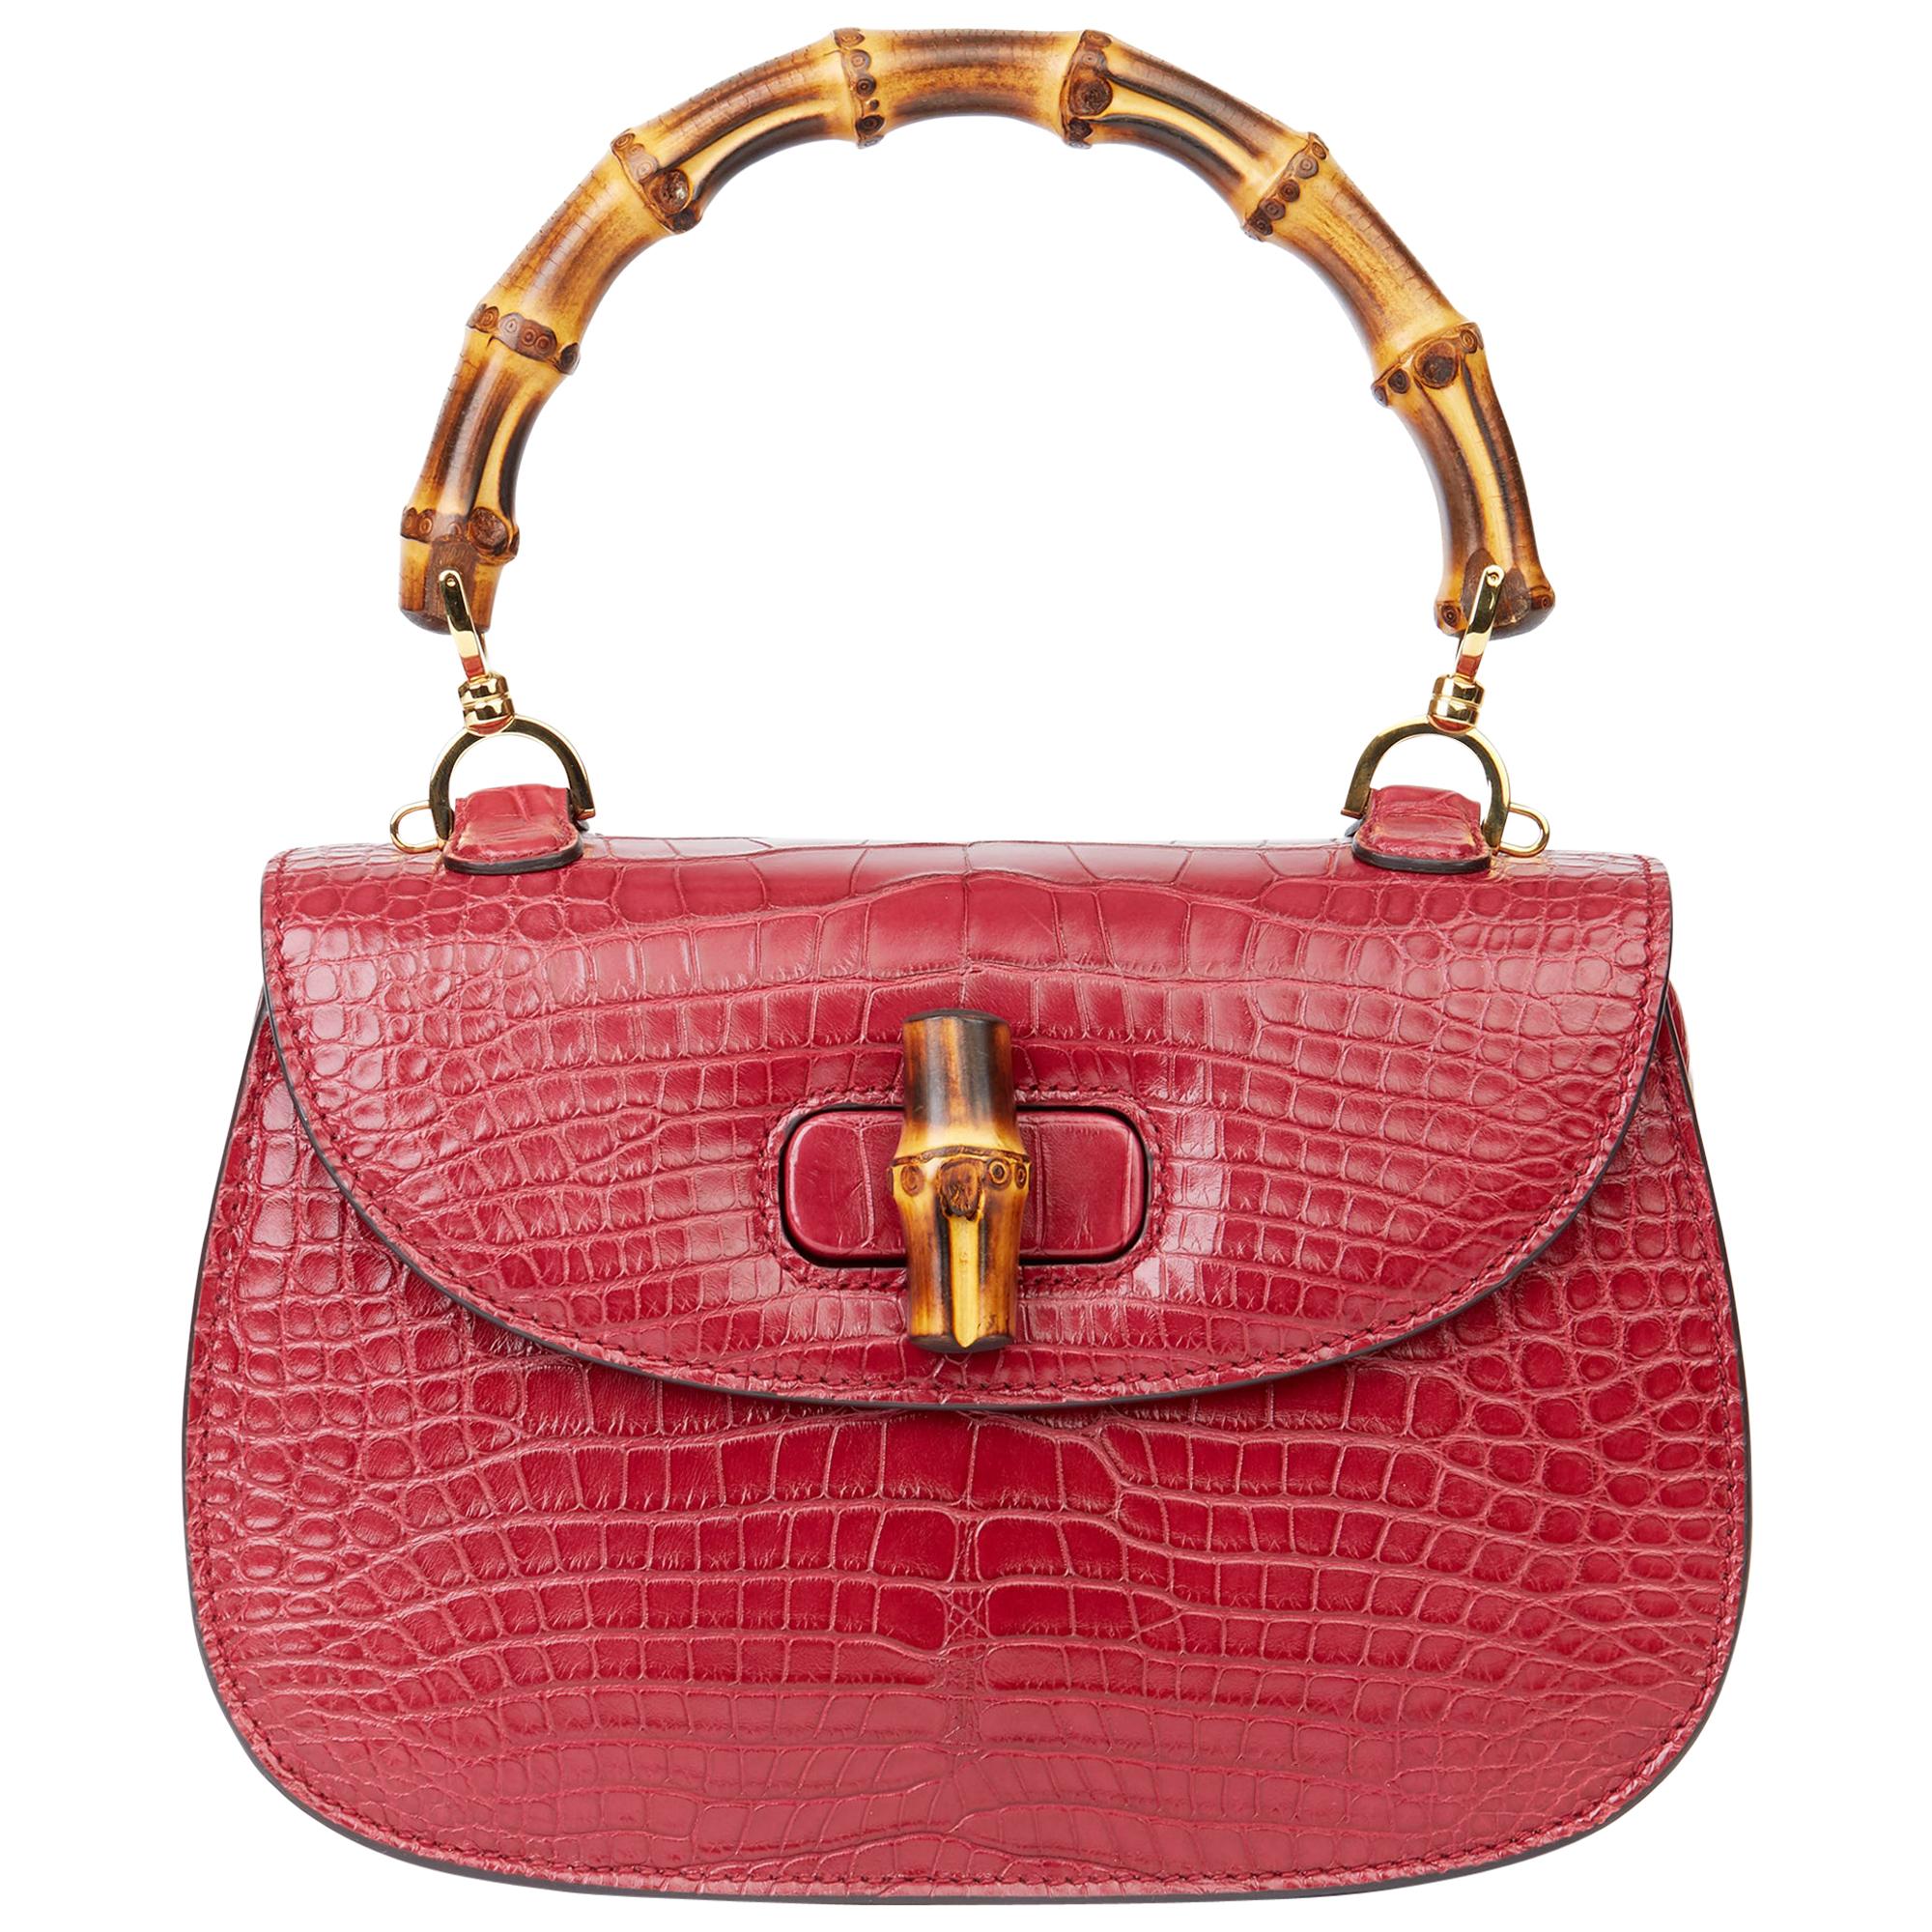 2019 Gucci Burgundy Alligator Leather Bamboo Classic Top Handle 